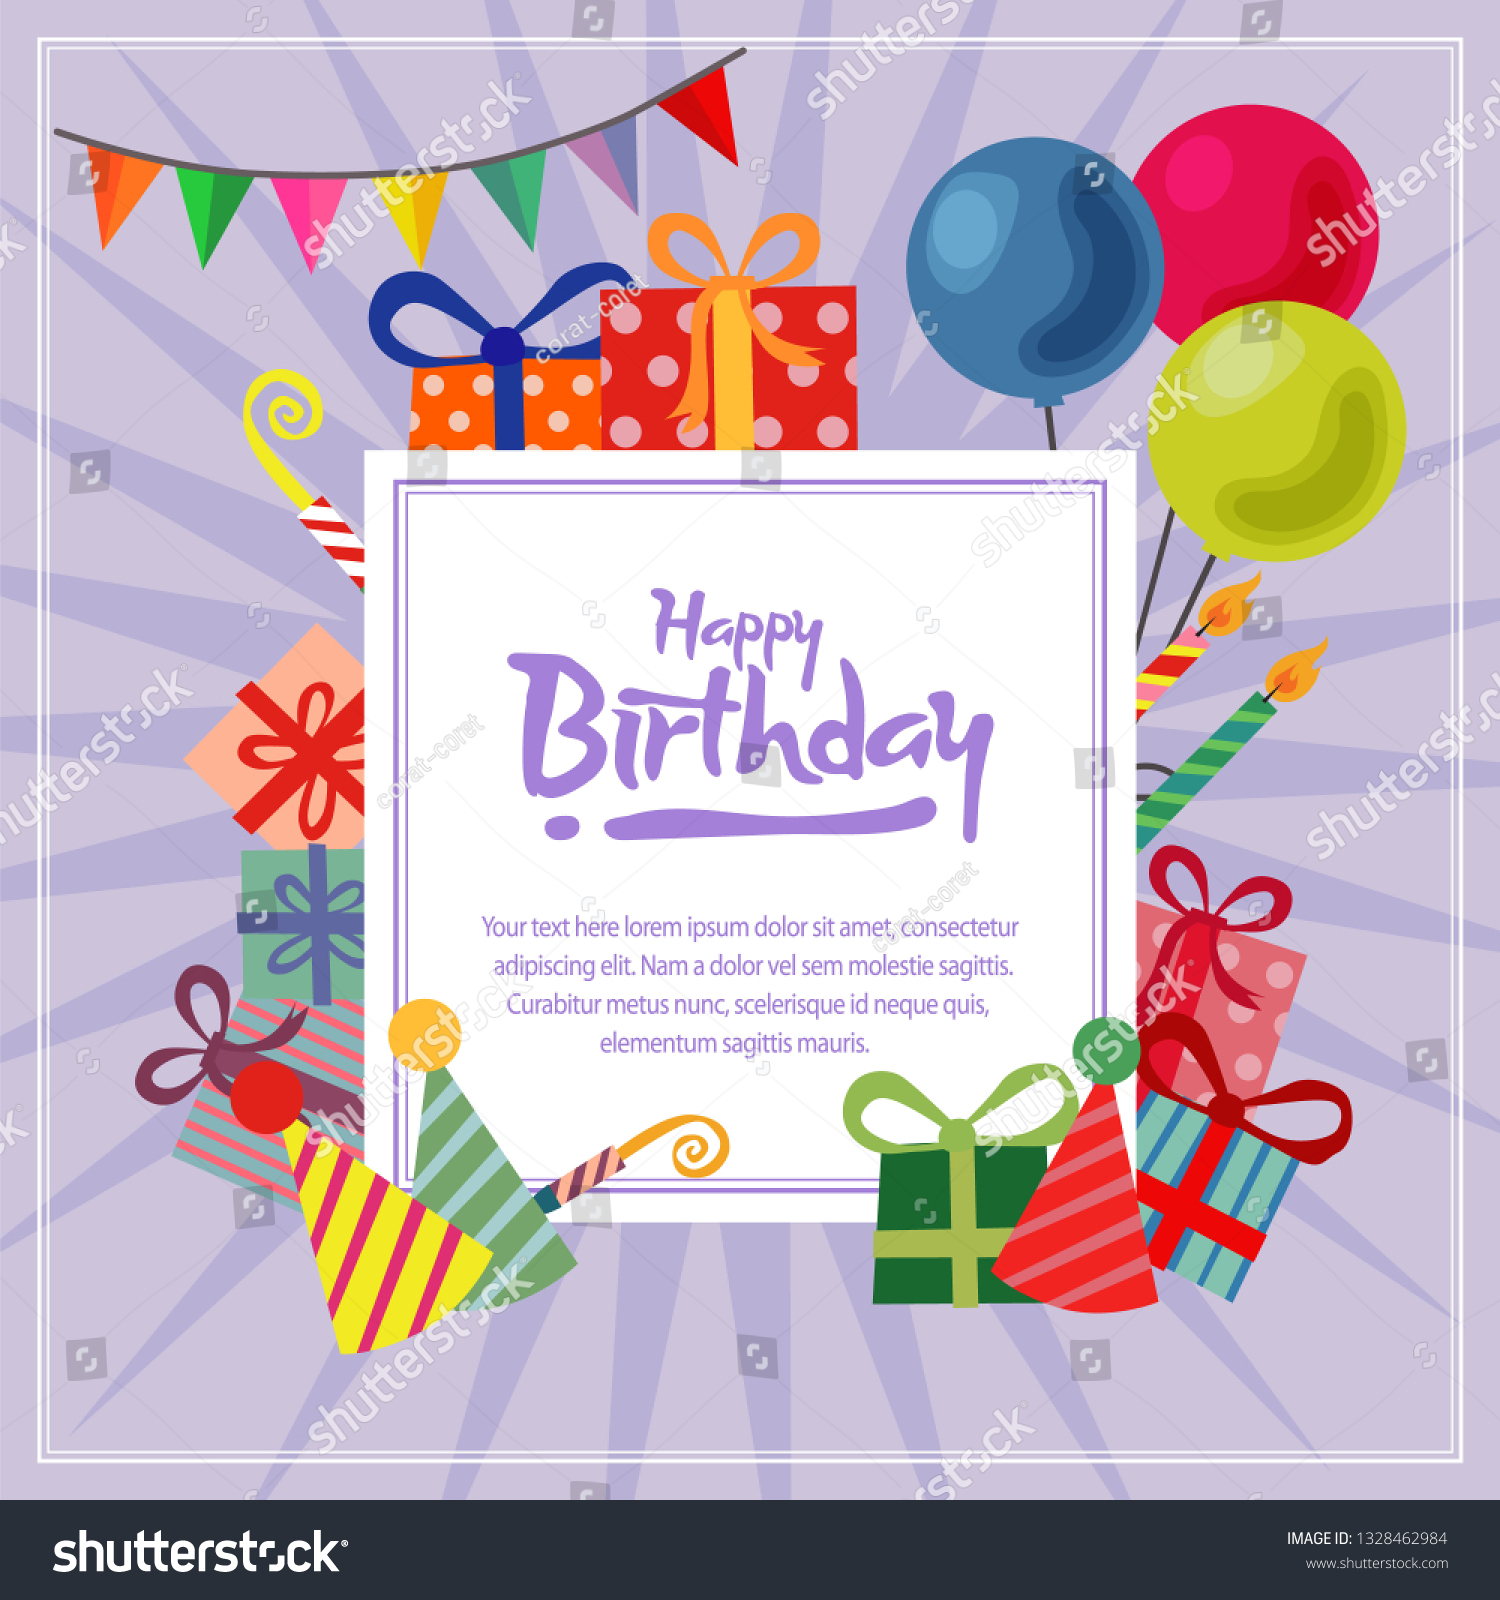 Birthday Card Template Party Elements Stock Vector (Royalty Free ...